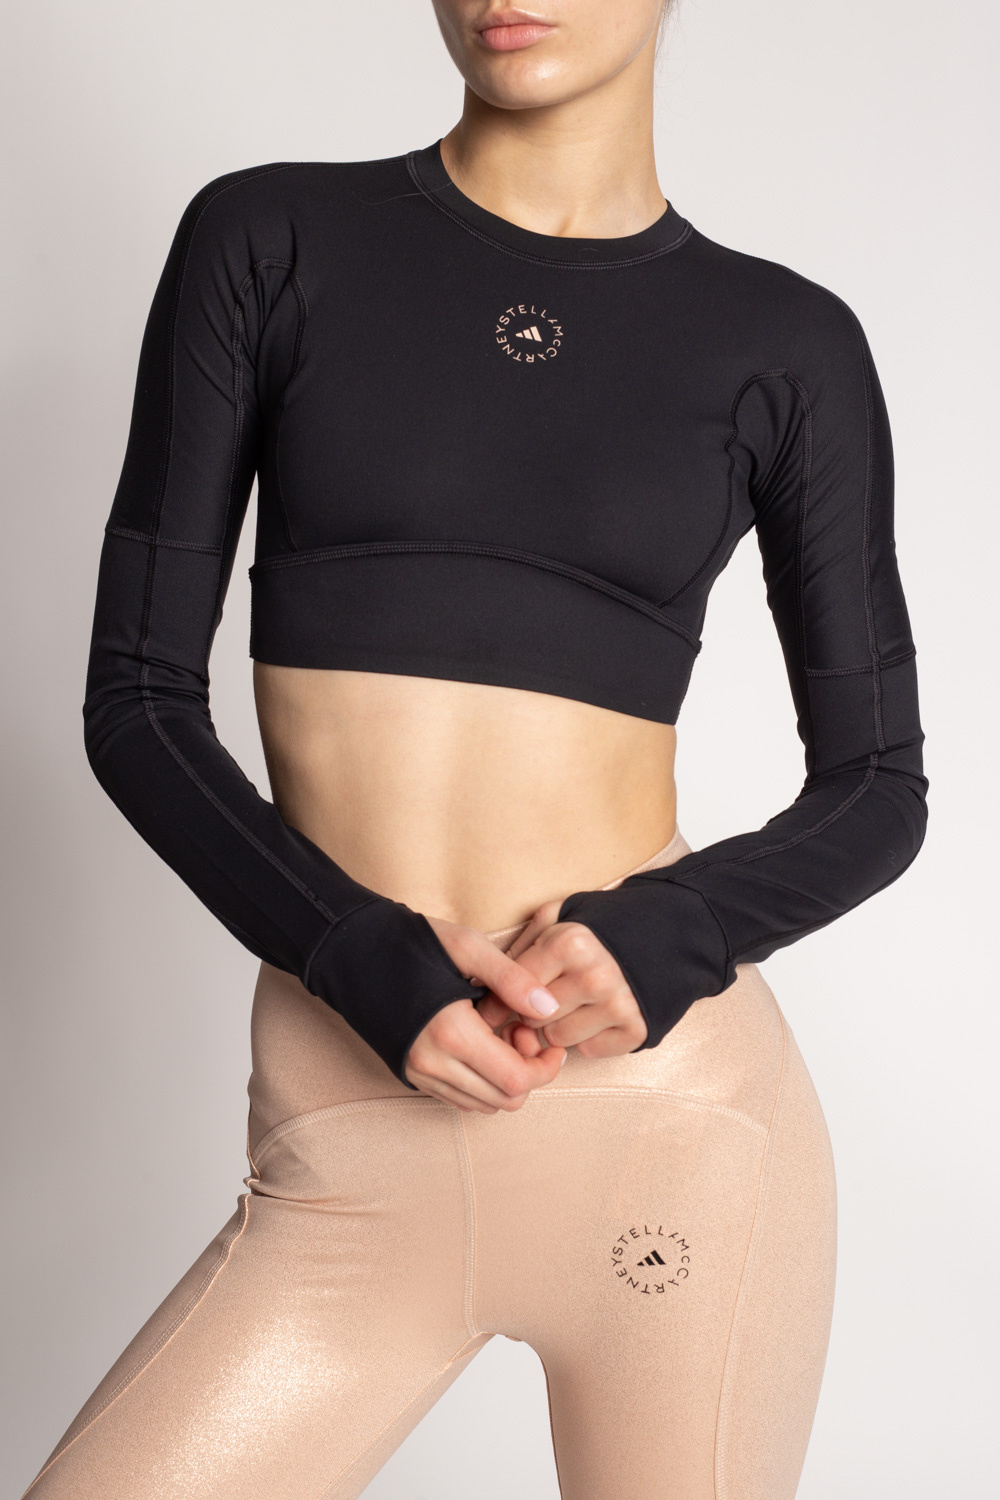 ADIDAS by Stella McCartney Cropped top with long sleeves